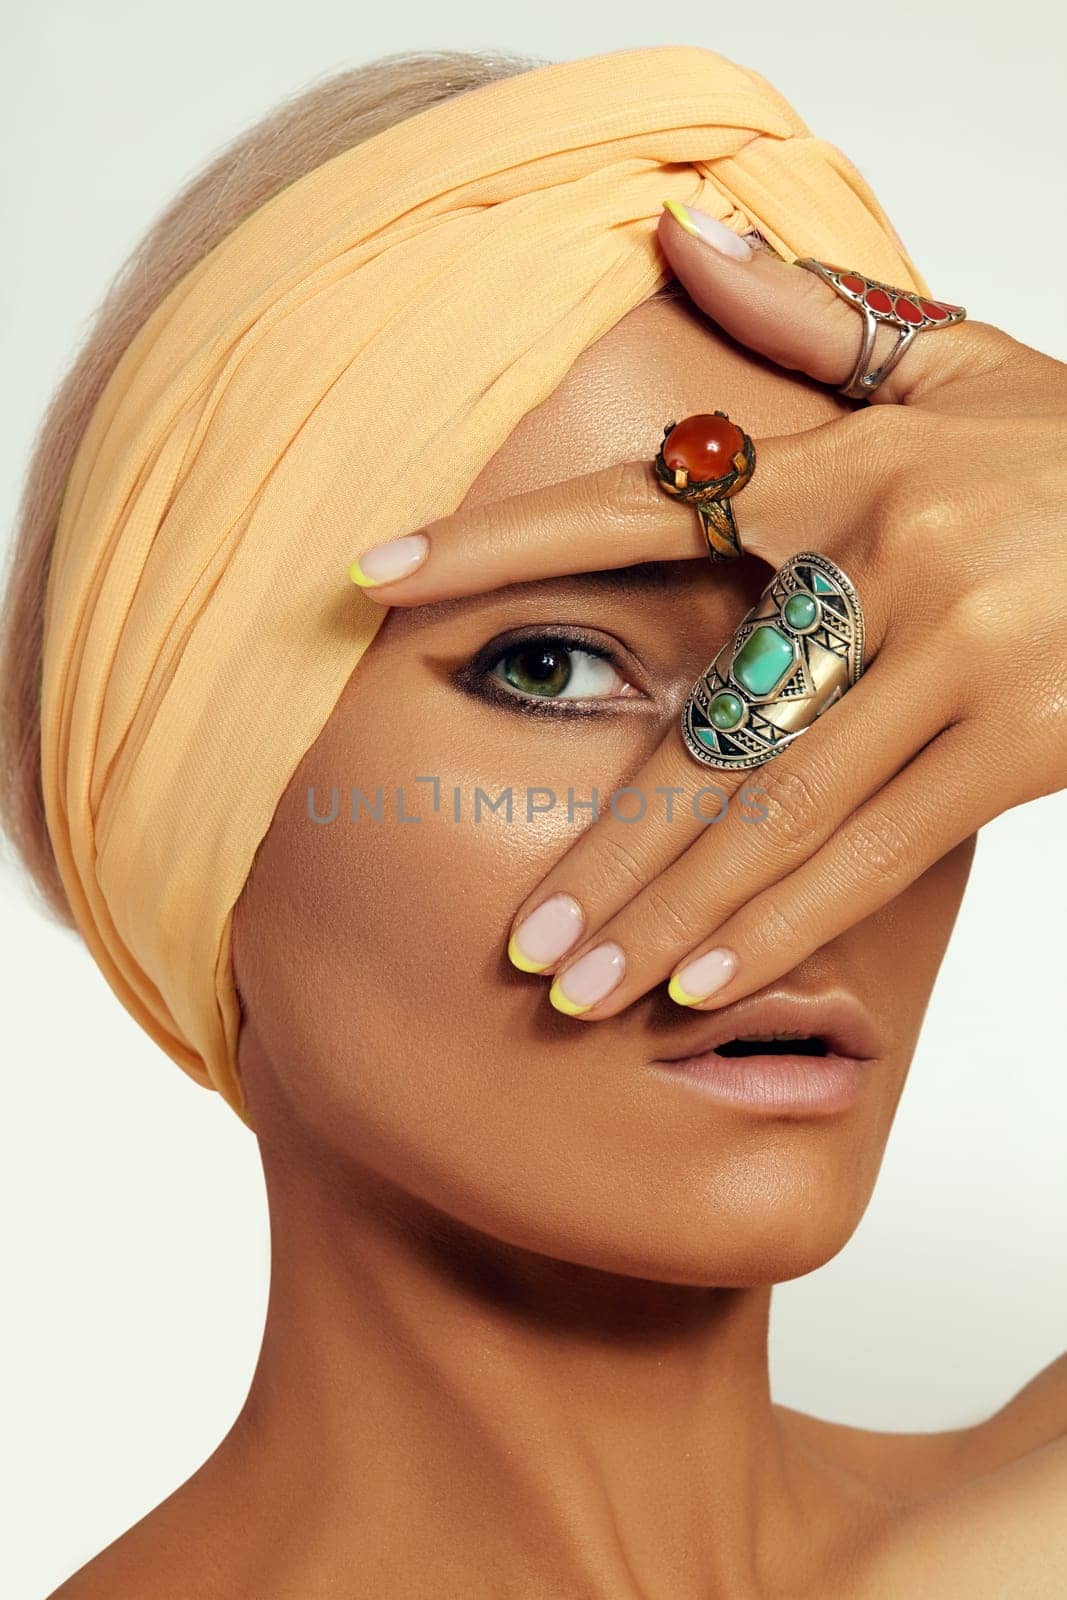 Boho Woman wearing Turban with Boho Accessories, Rings, Fashion Makeup by MarinaFrost